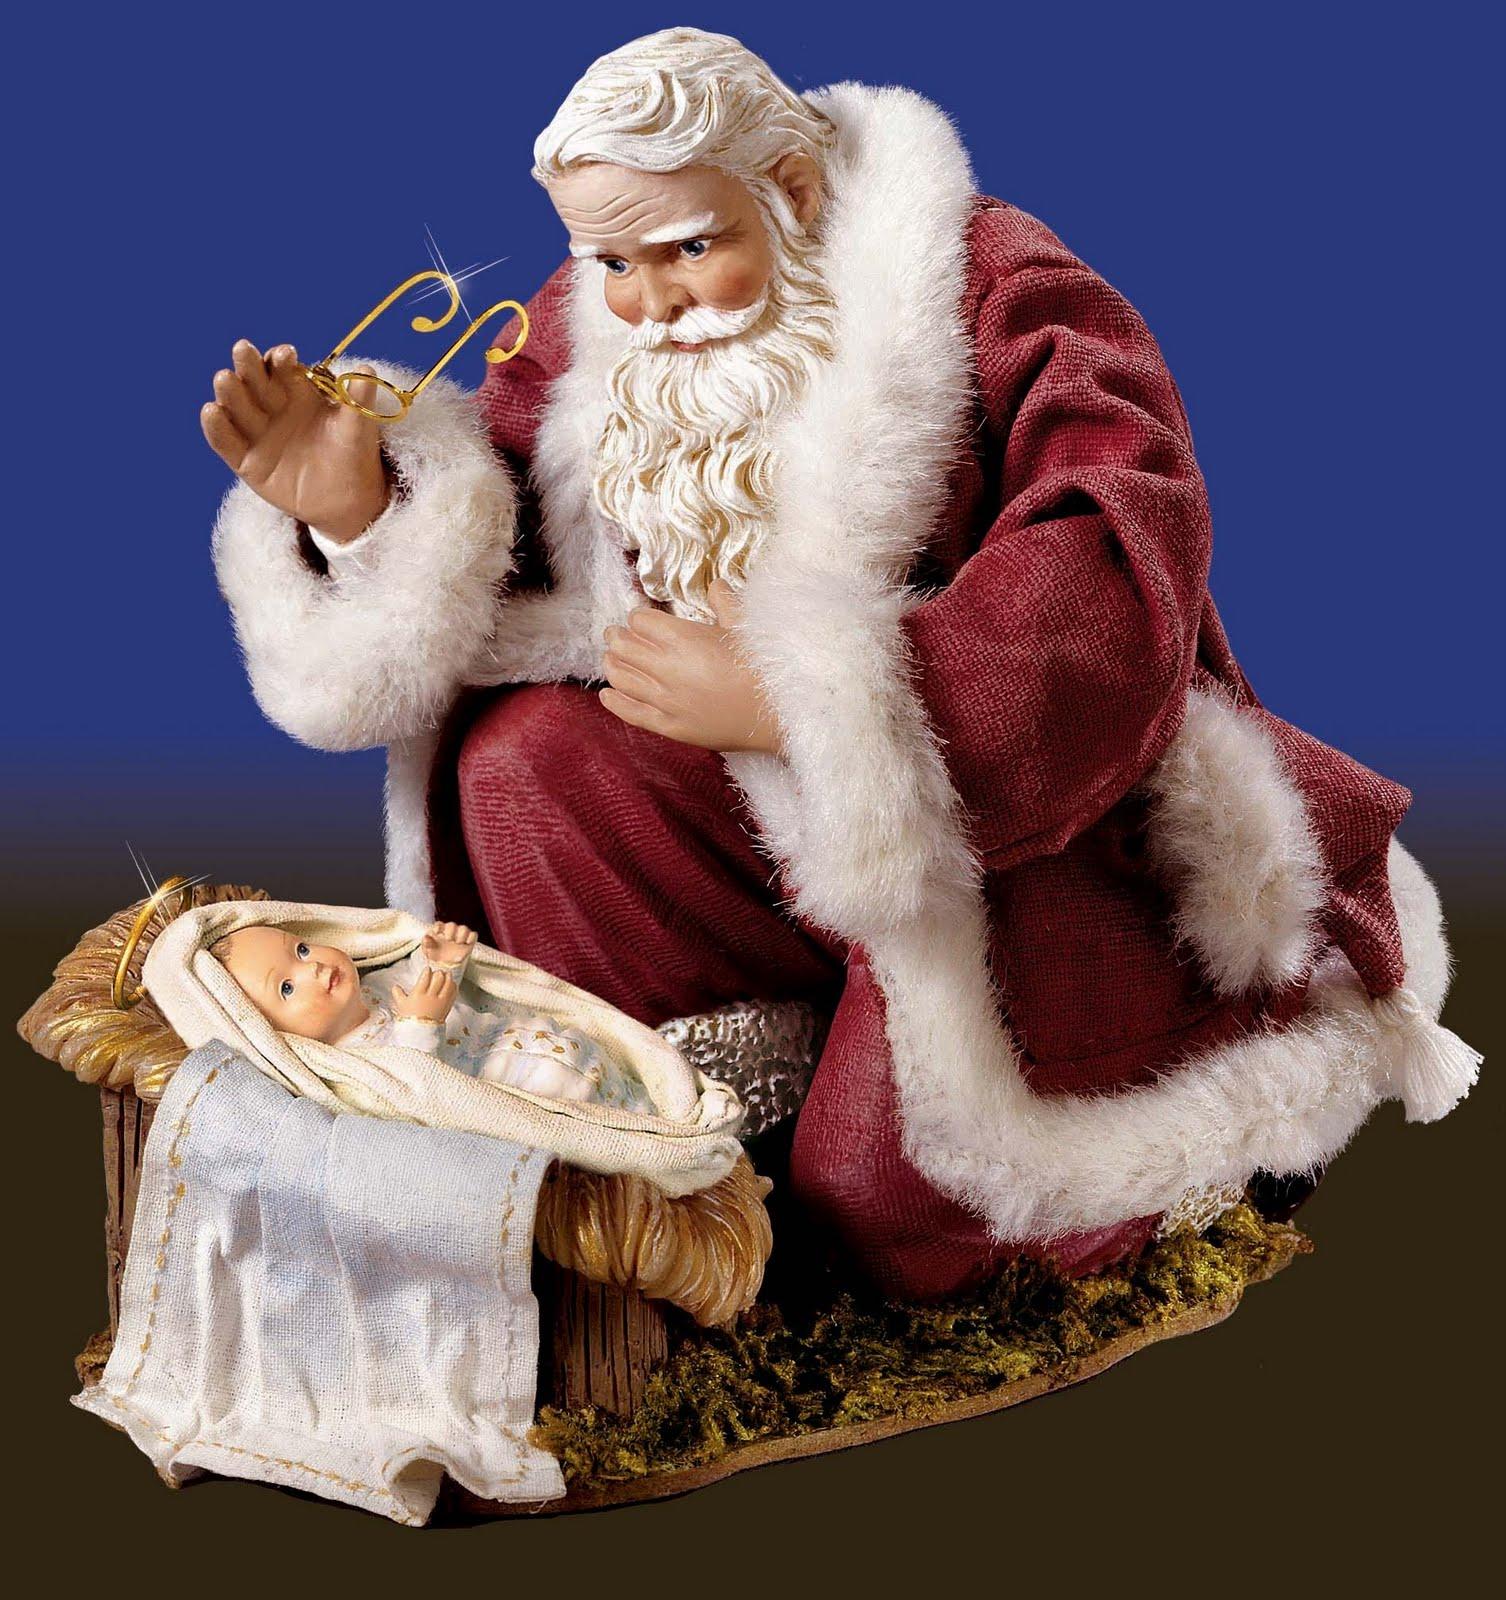 Christmas Wallpaper and Image and Photo: baby jesus wallpaper